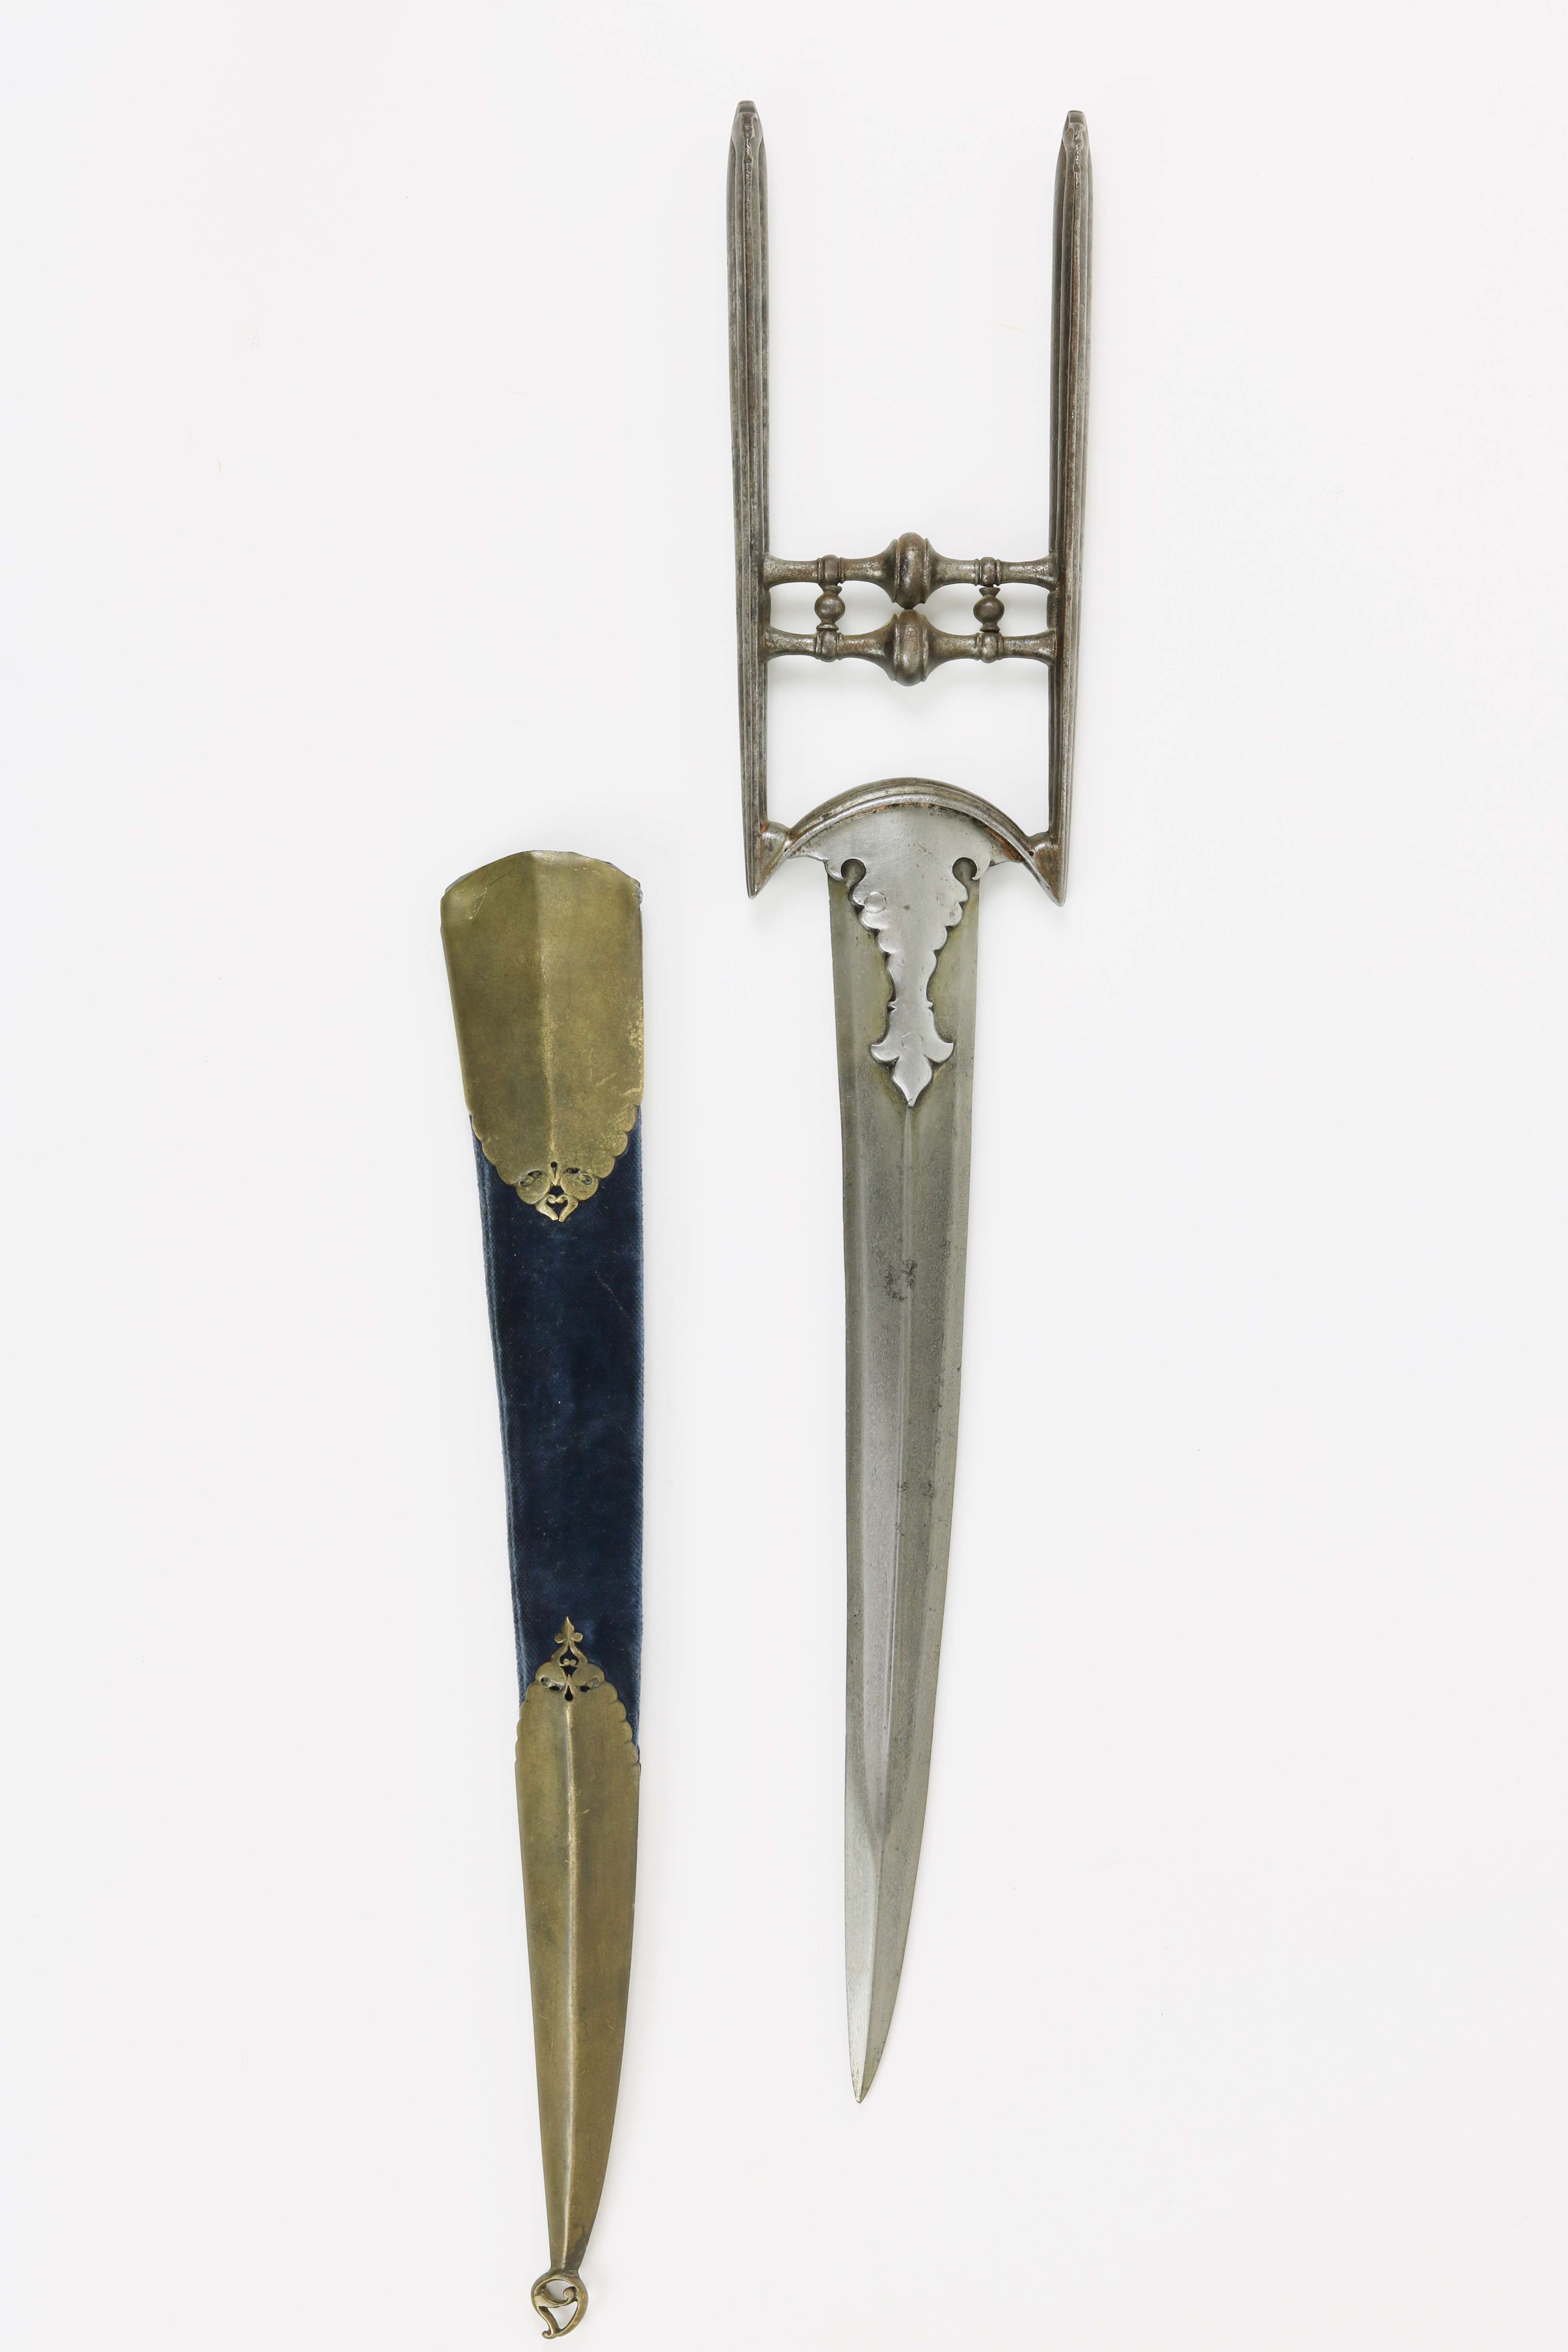 17th century South Indian katar with curved blade